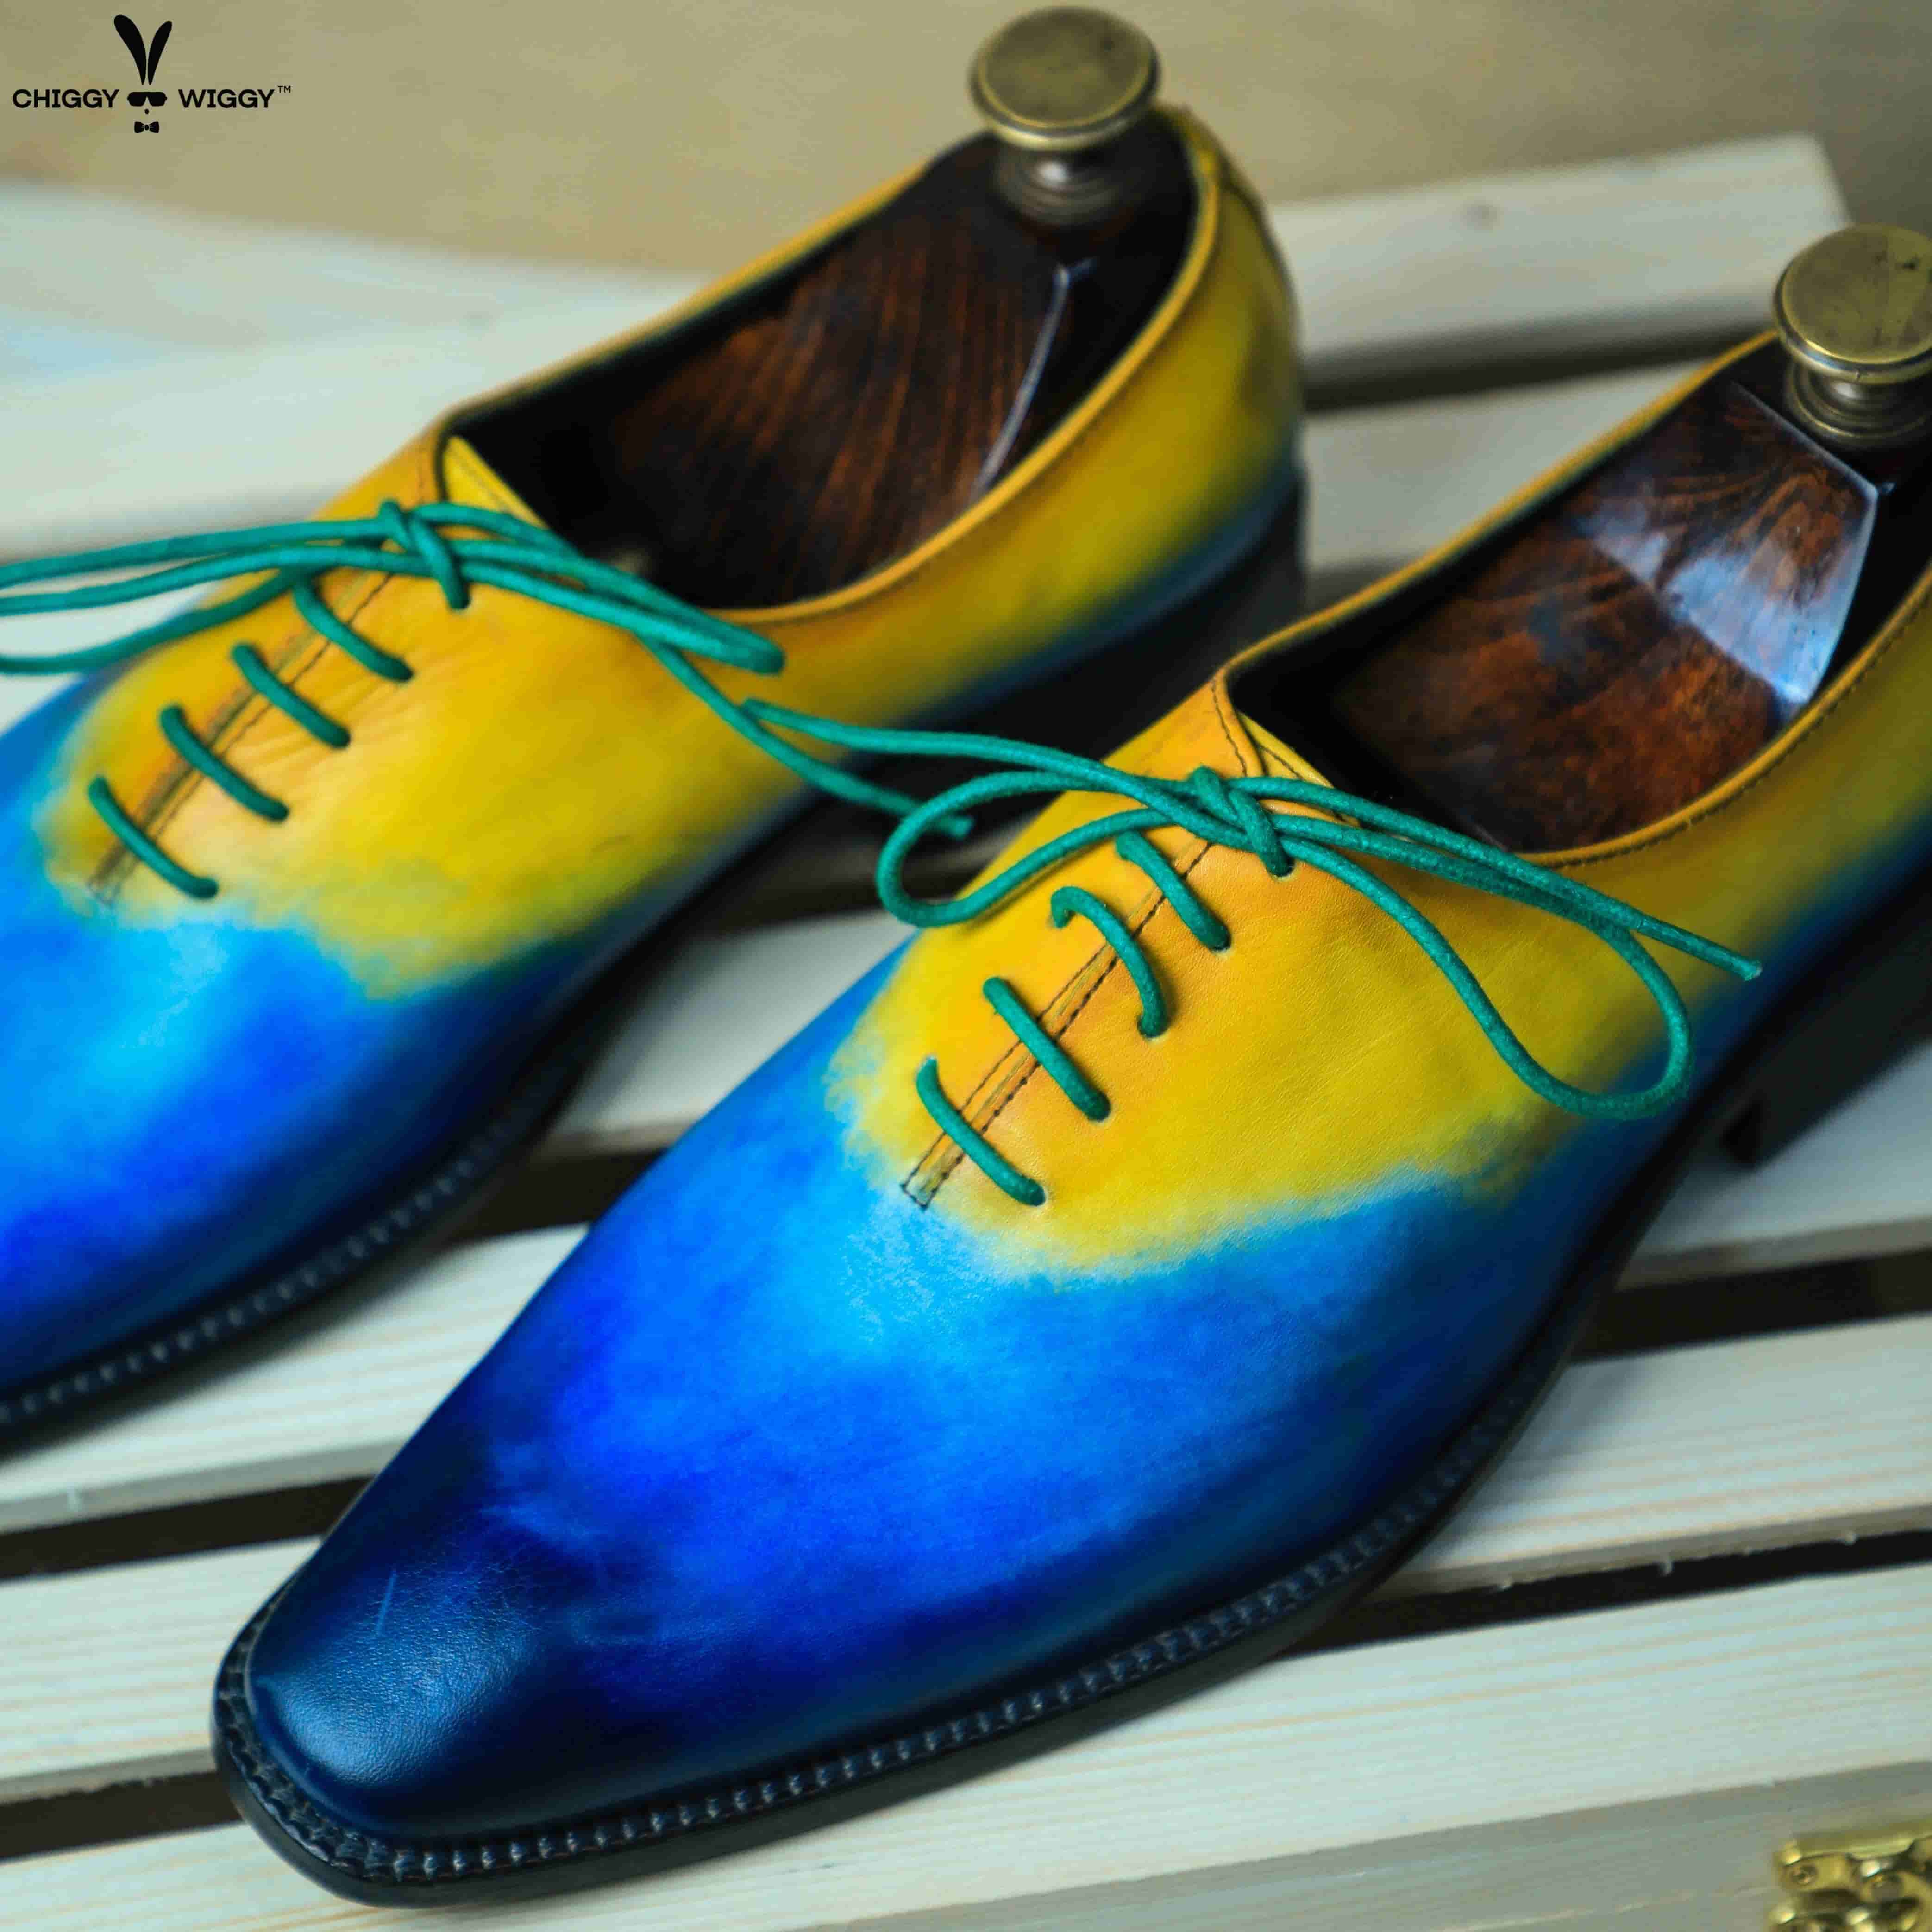 lace-up-patina-italian-calf-skin-shoes-original-leather-sole-leather-the-chiggy-wiggy-laceuppatina-shoes-1